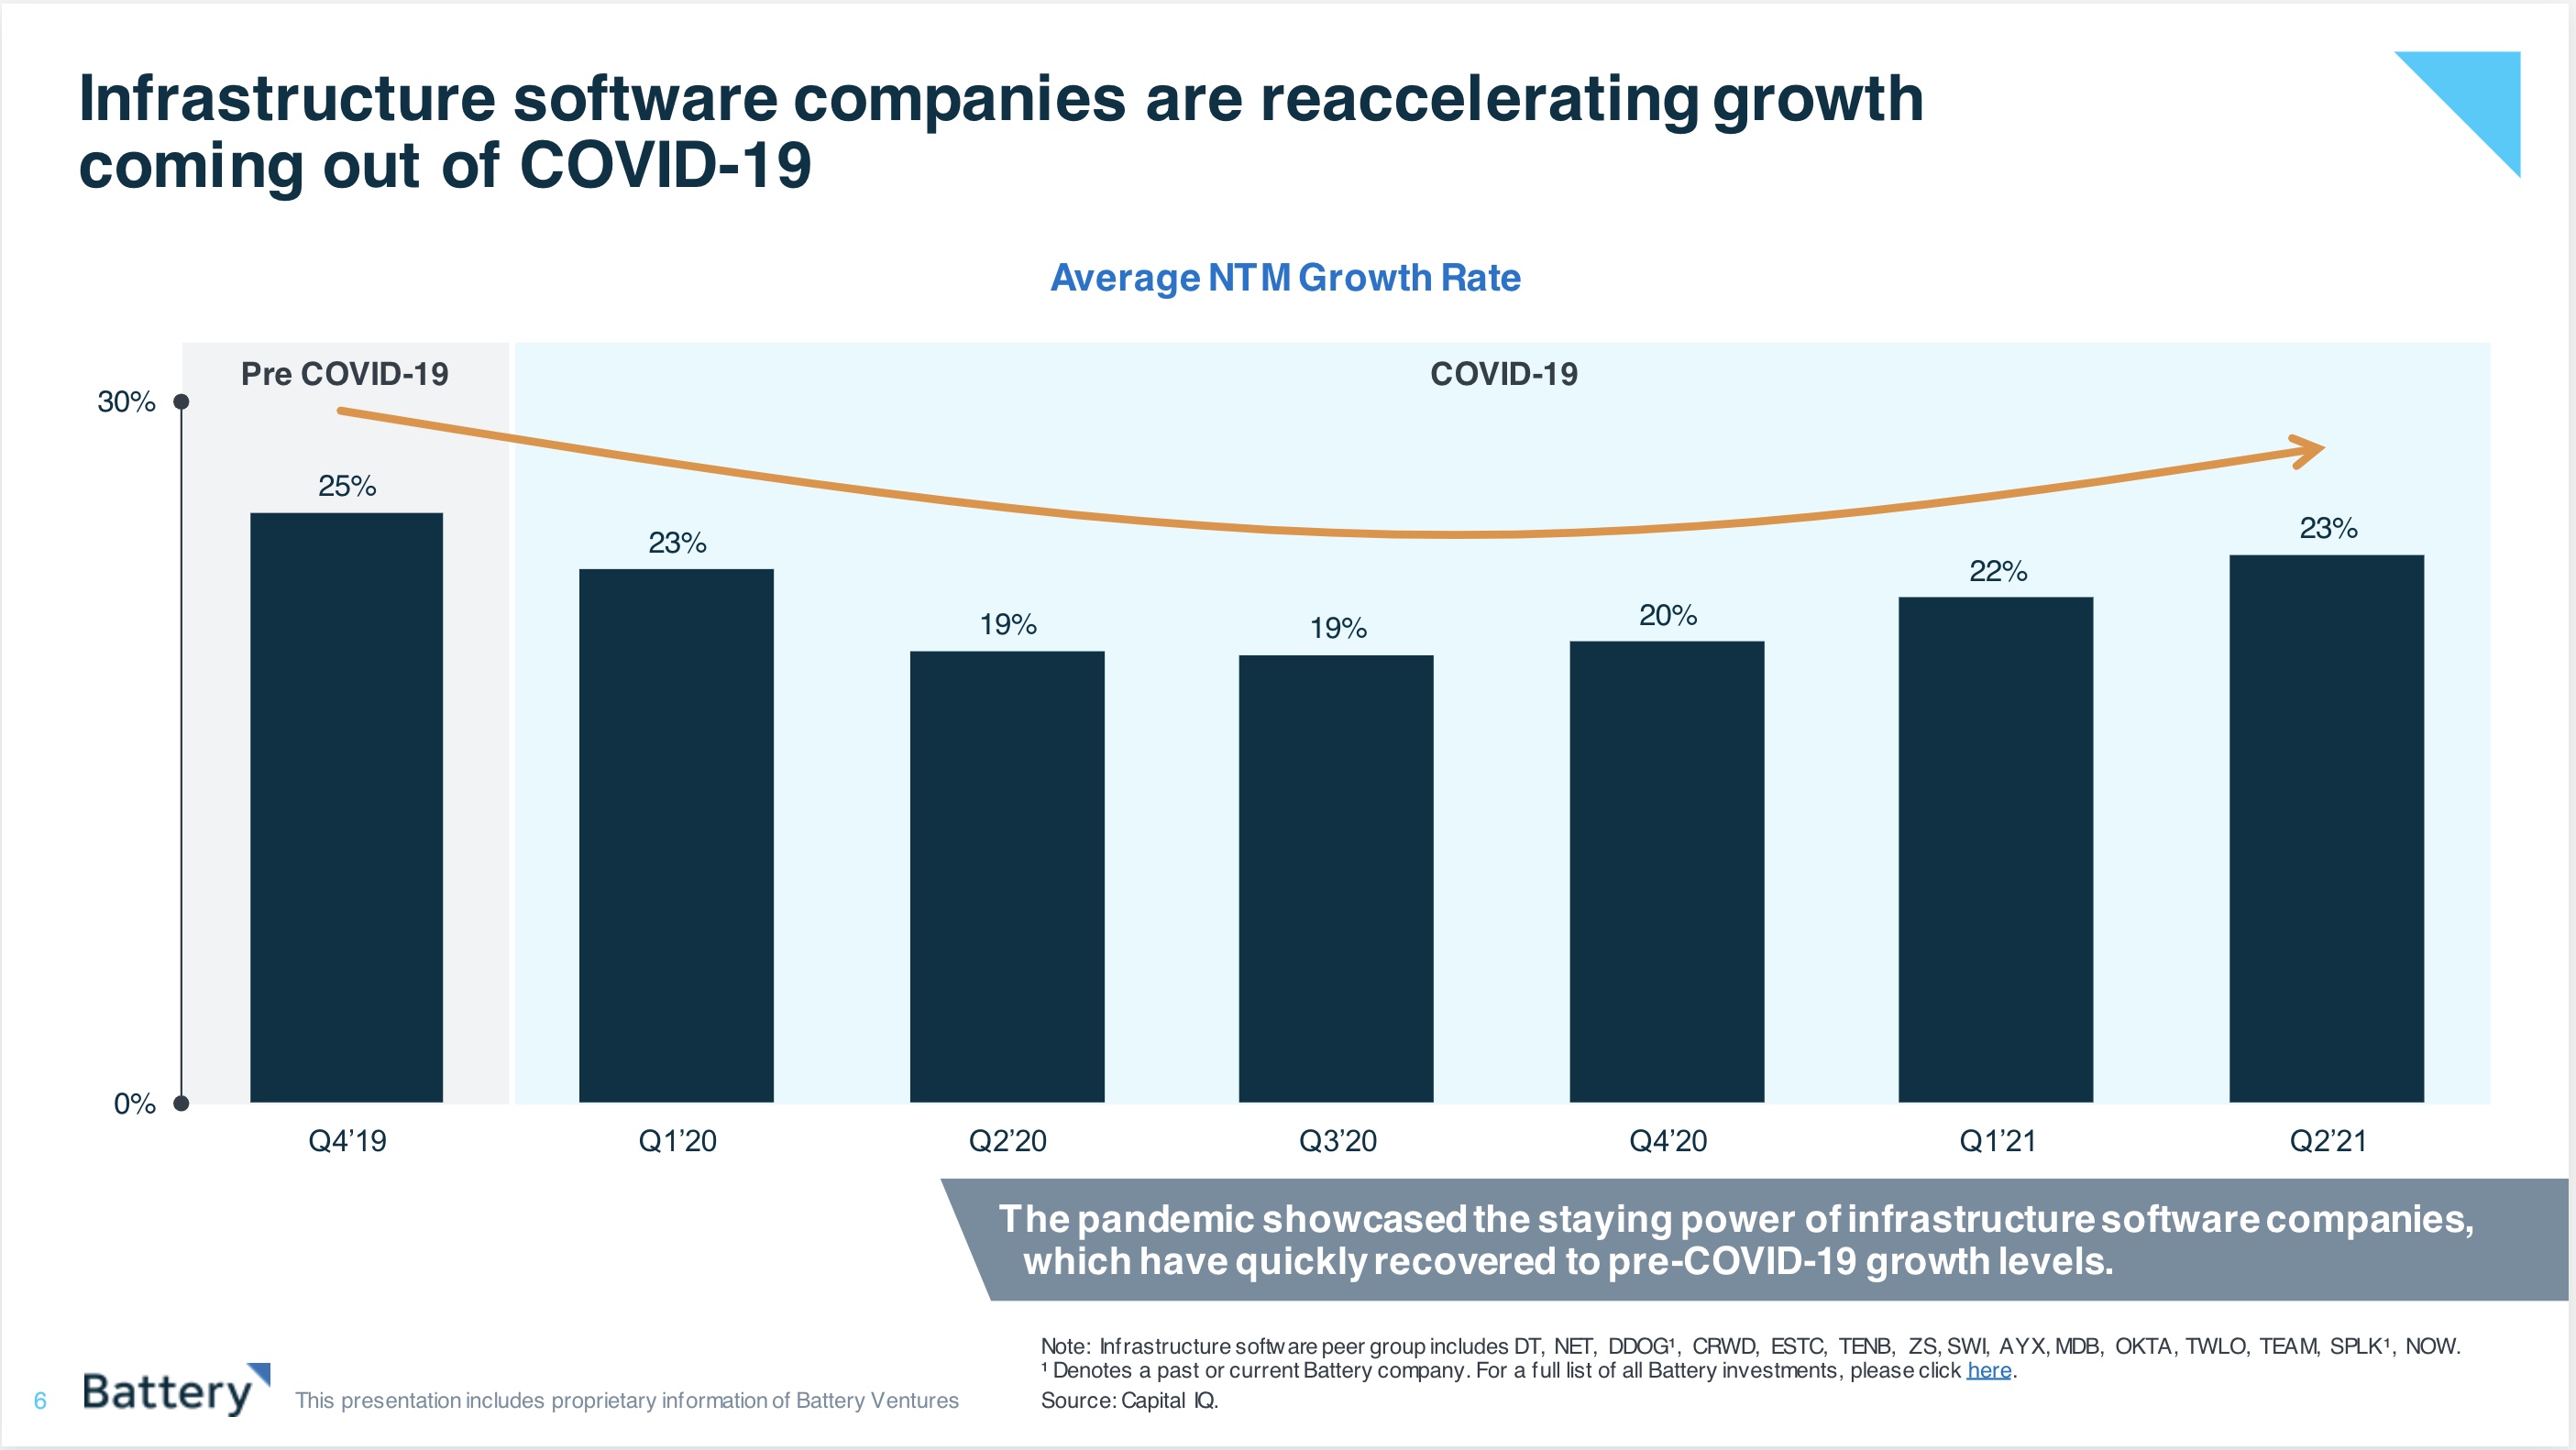 Battery Ventures State Cloud Report -- SaaS company growth during COVID